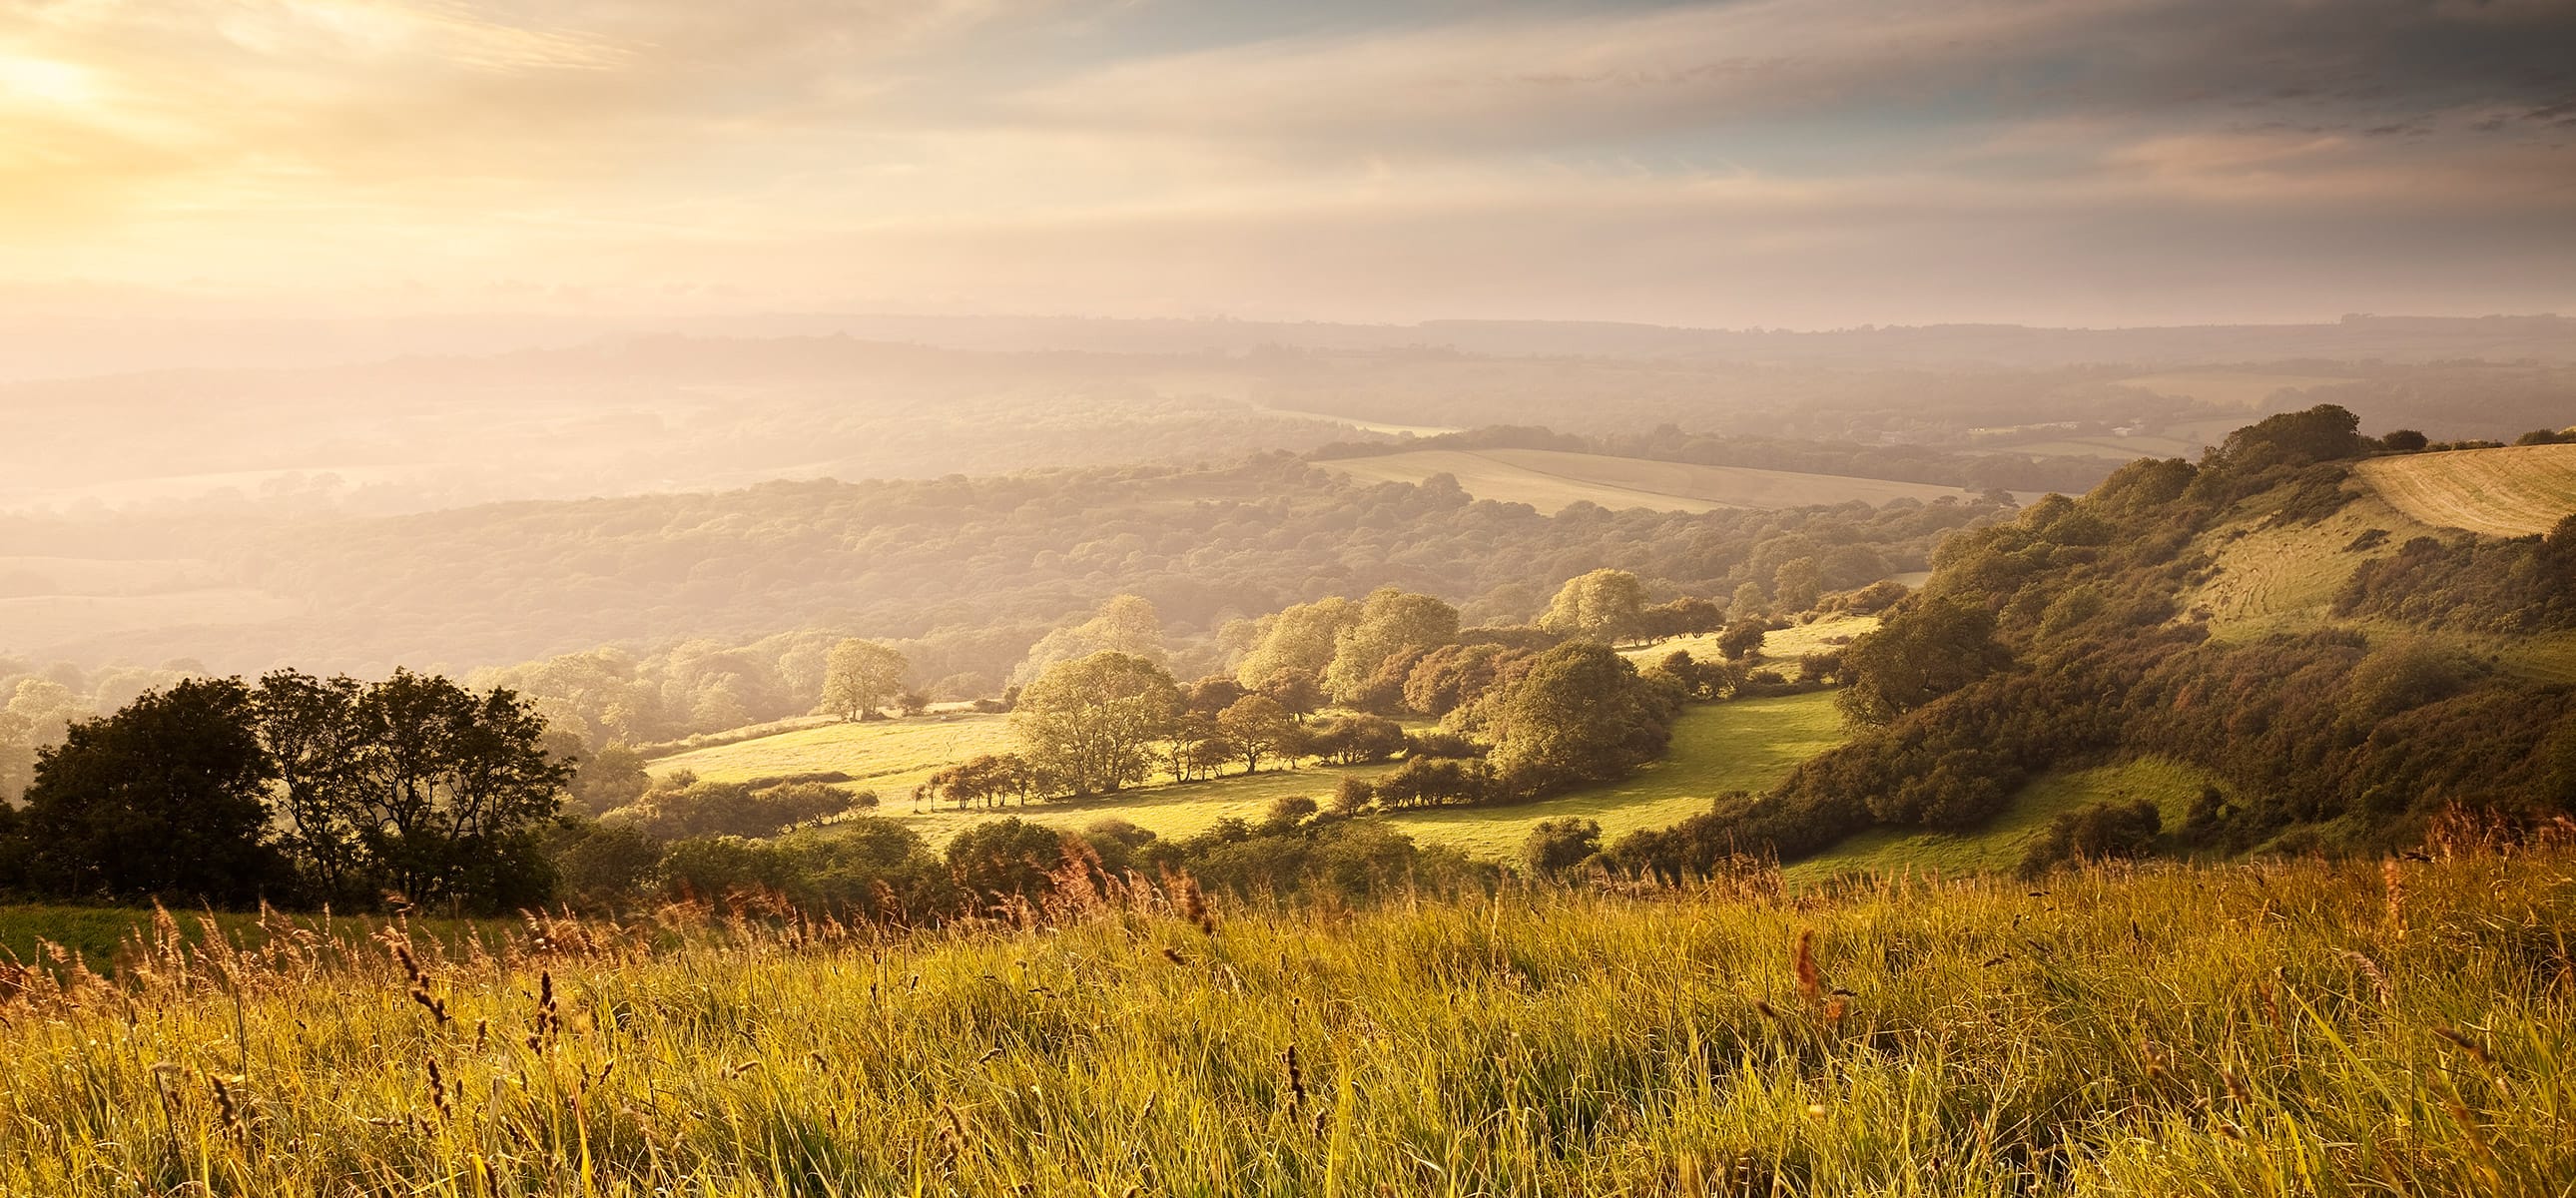 An image of the Dorset countryside in summer